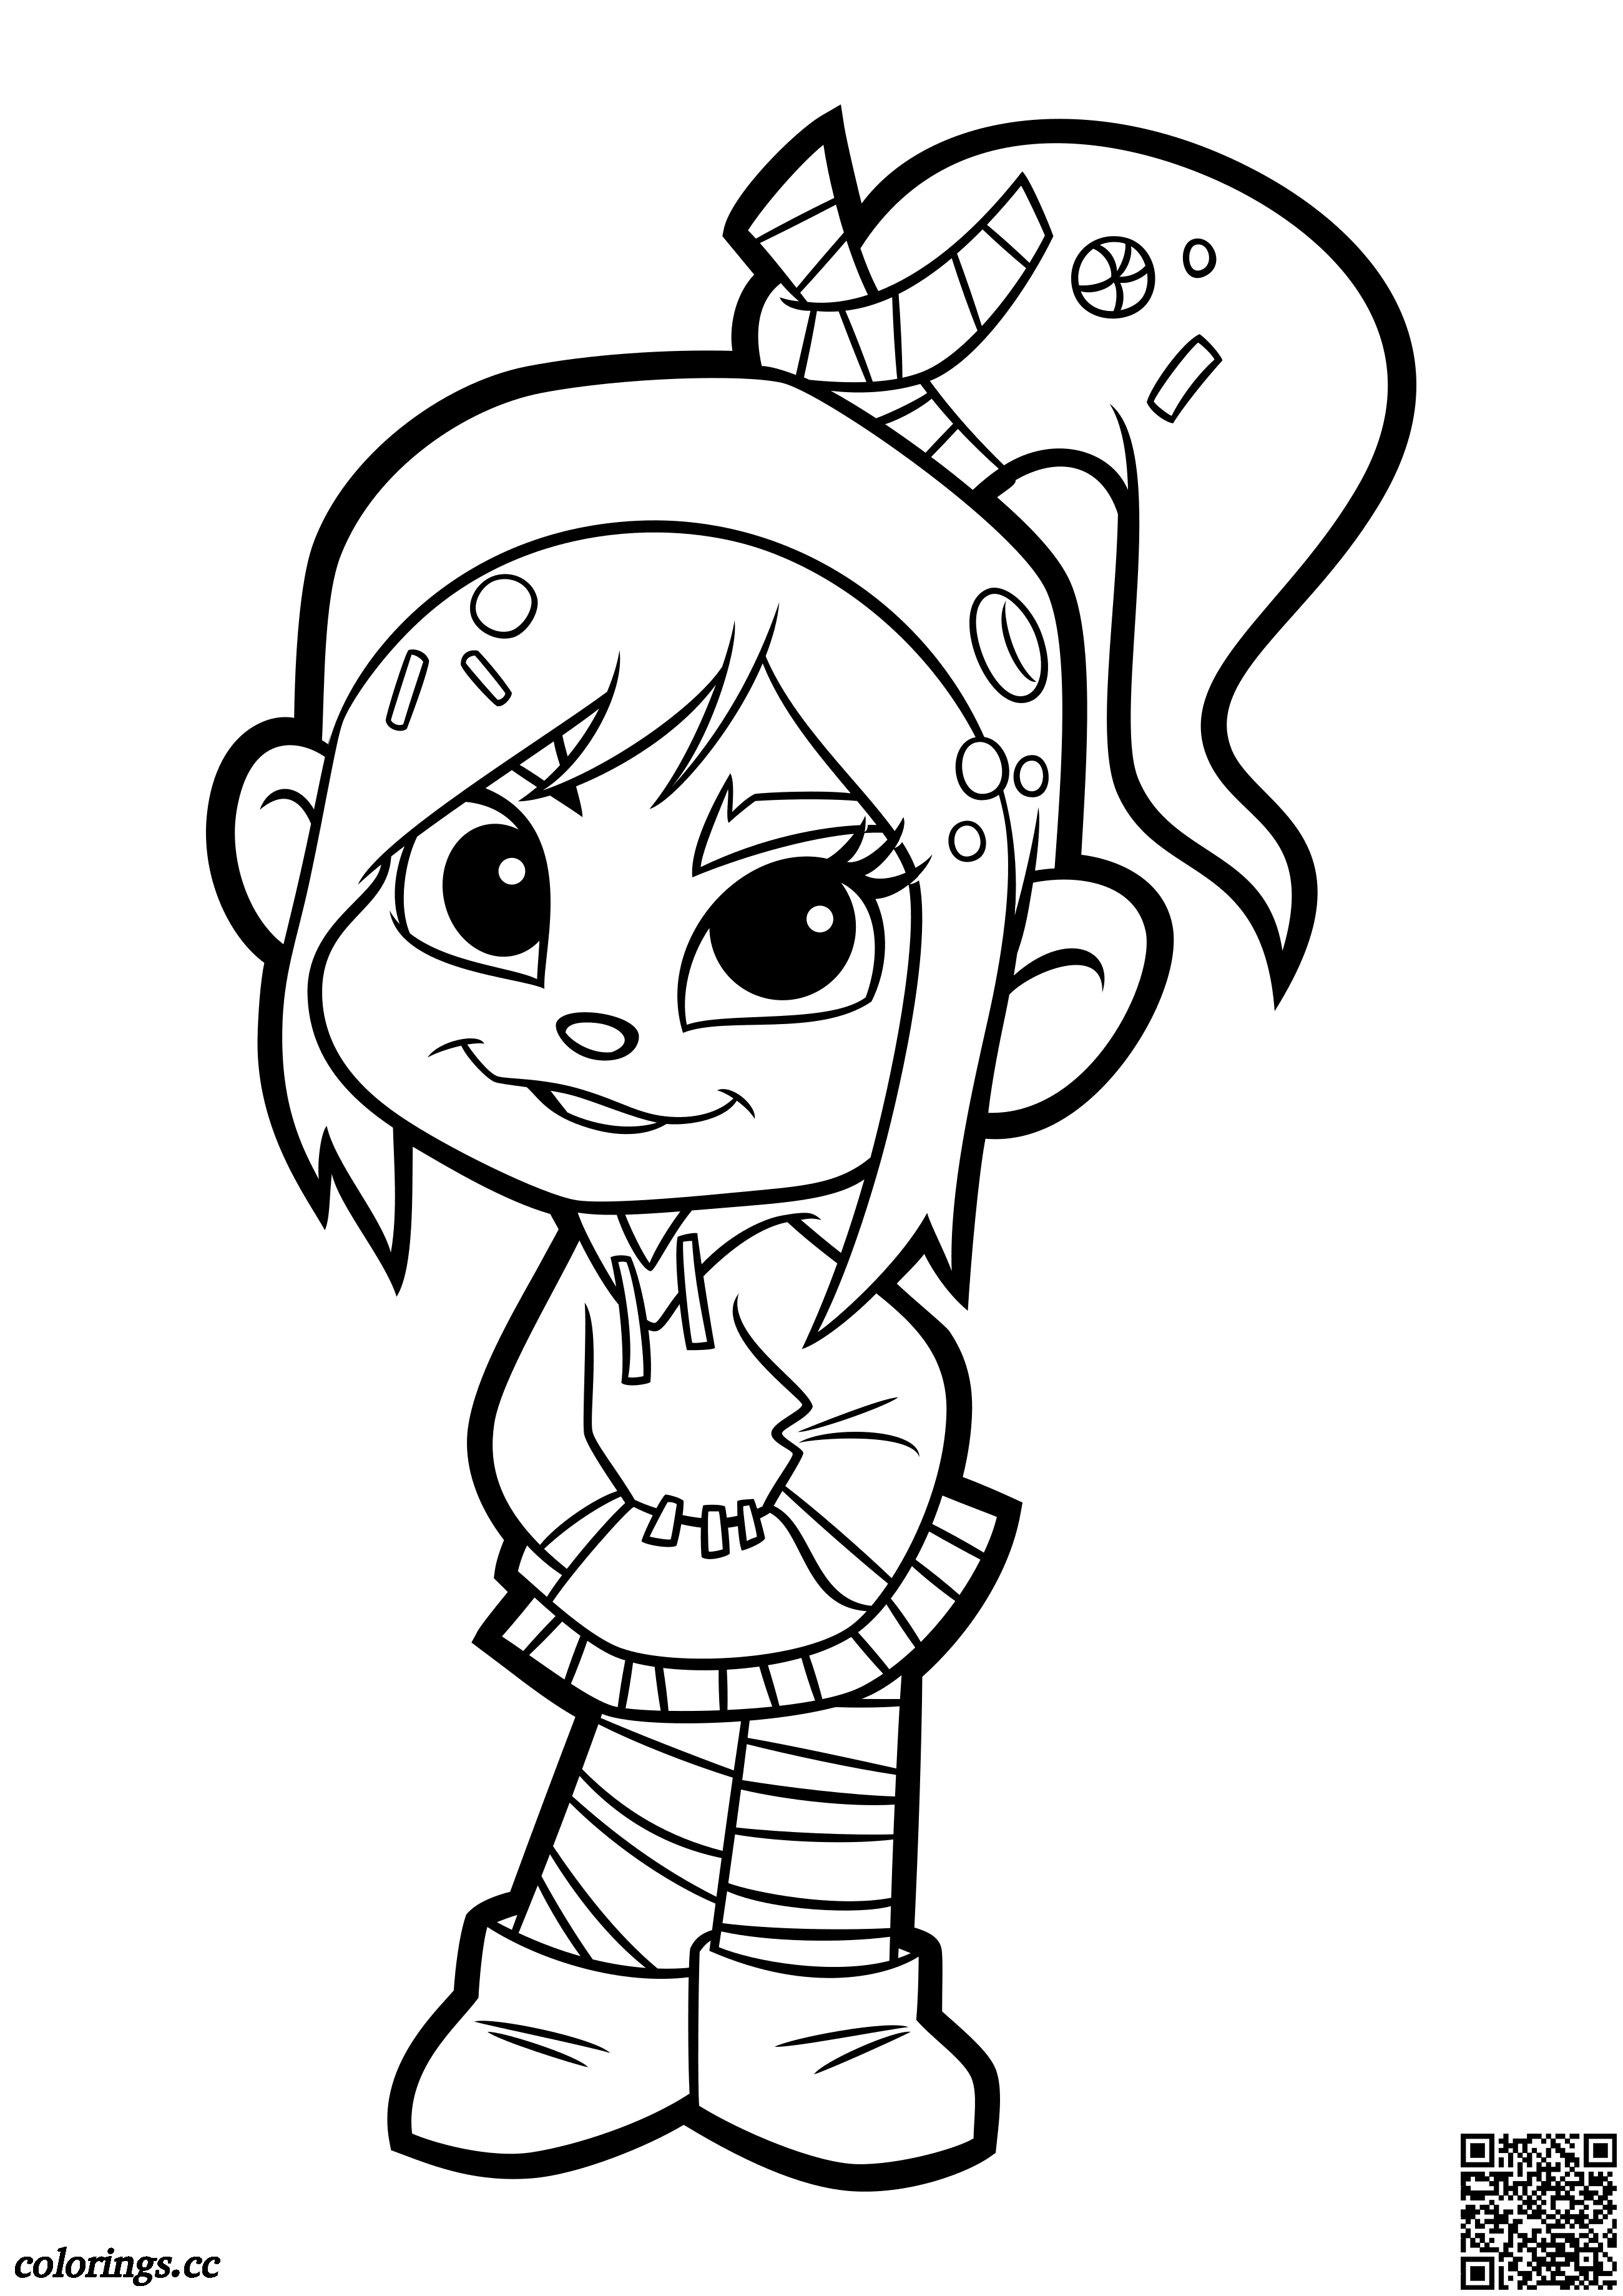 Vanellope von Schweetz coloring pages, Ralph coloring pages - Colorings.cc